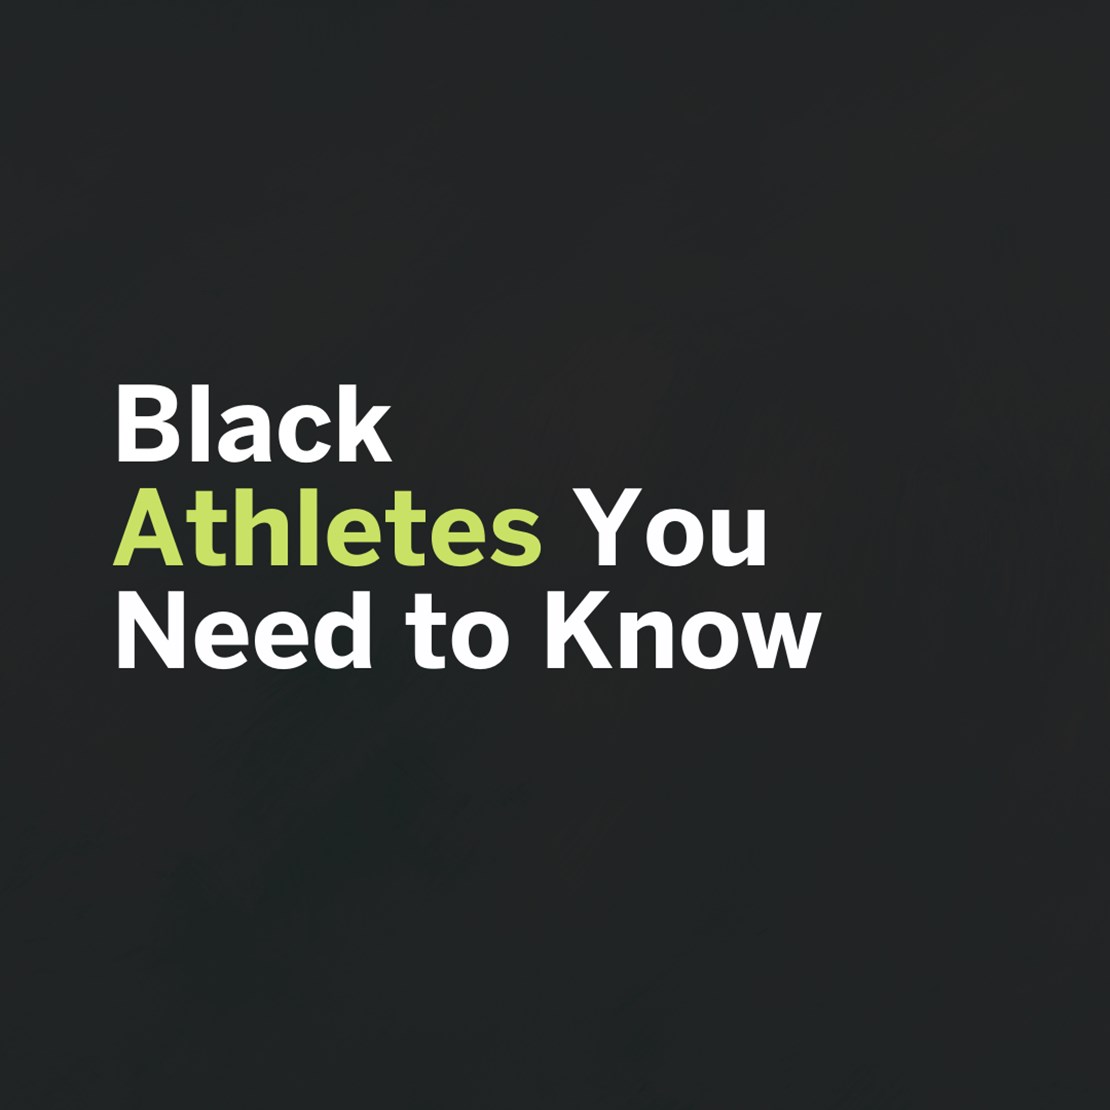 Black Athletes You Need to Know